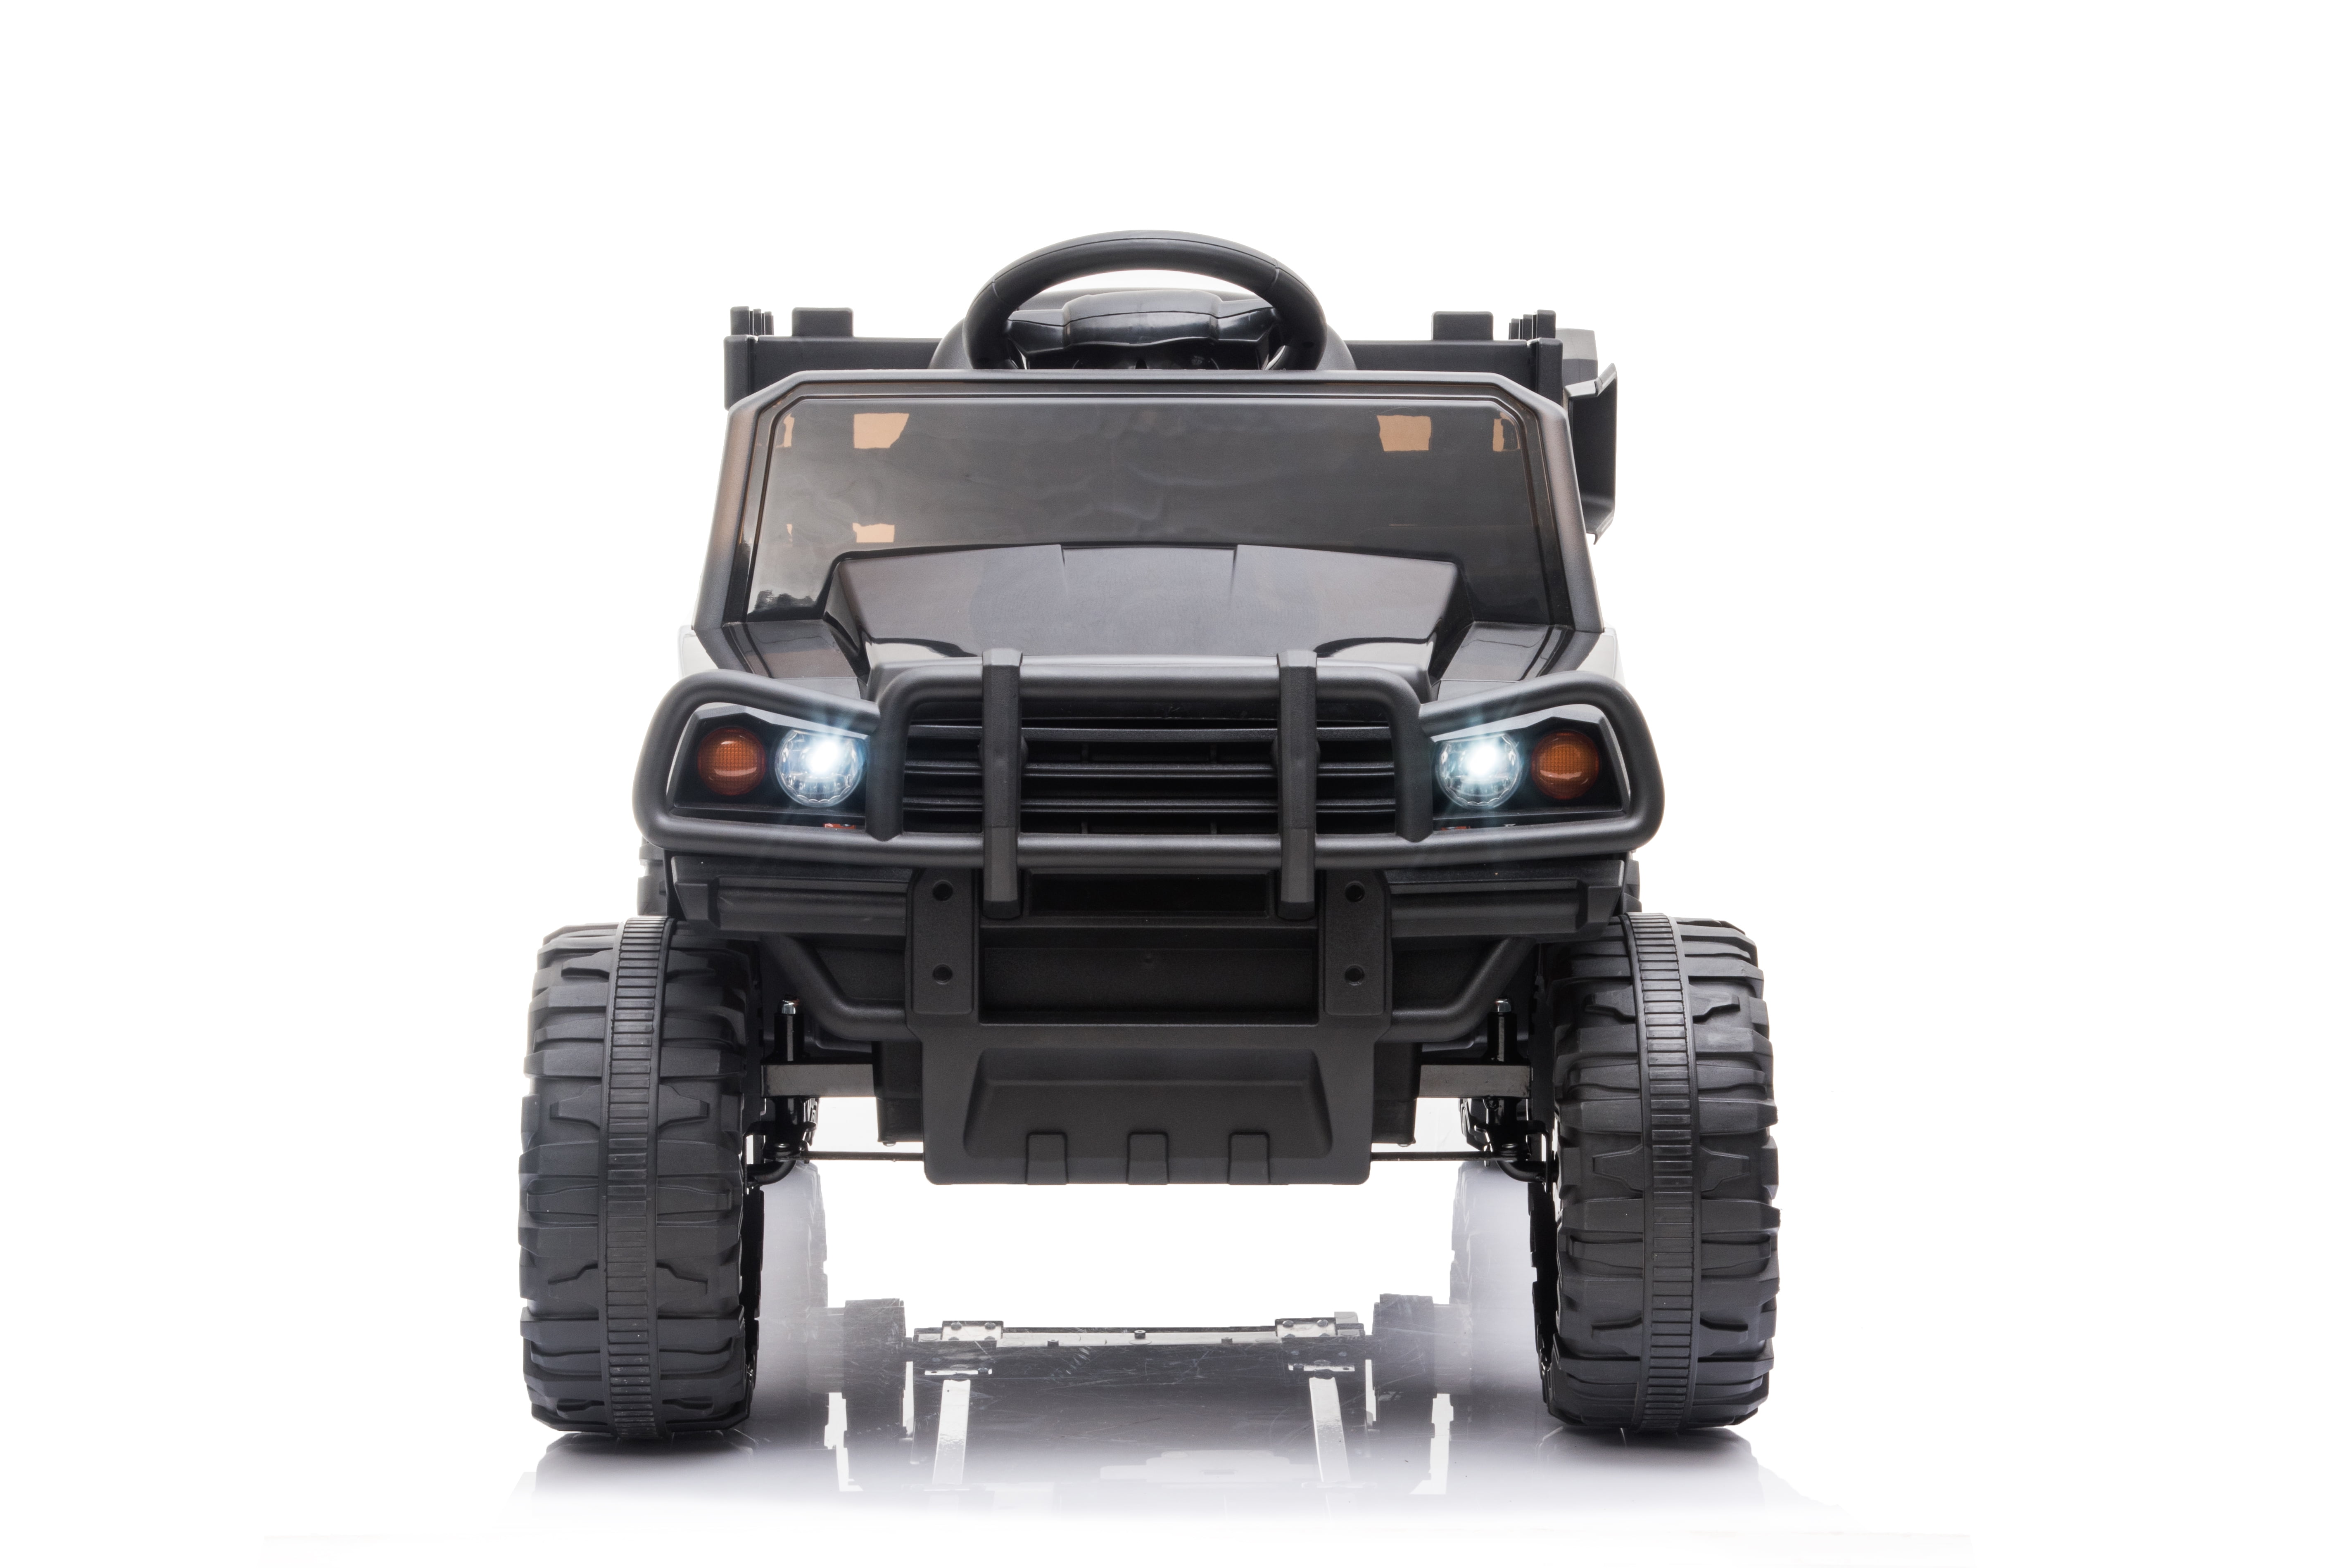 Details about   12V Electric Kids Police Ride On SUV Toy Car Remote Control LED & Music & Horn 